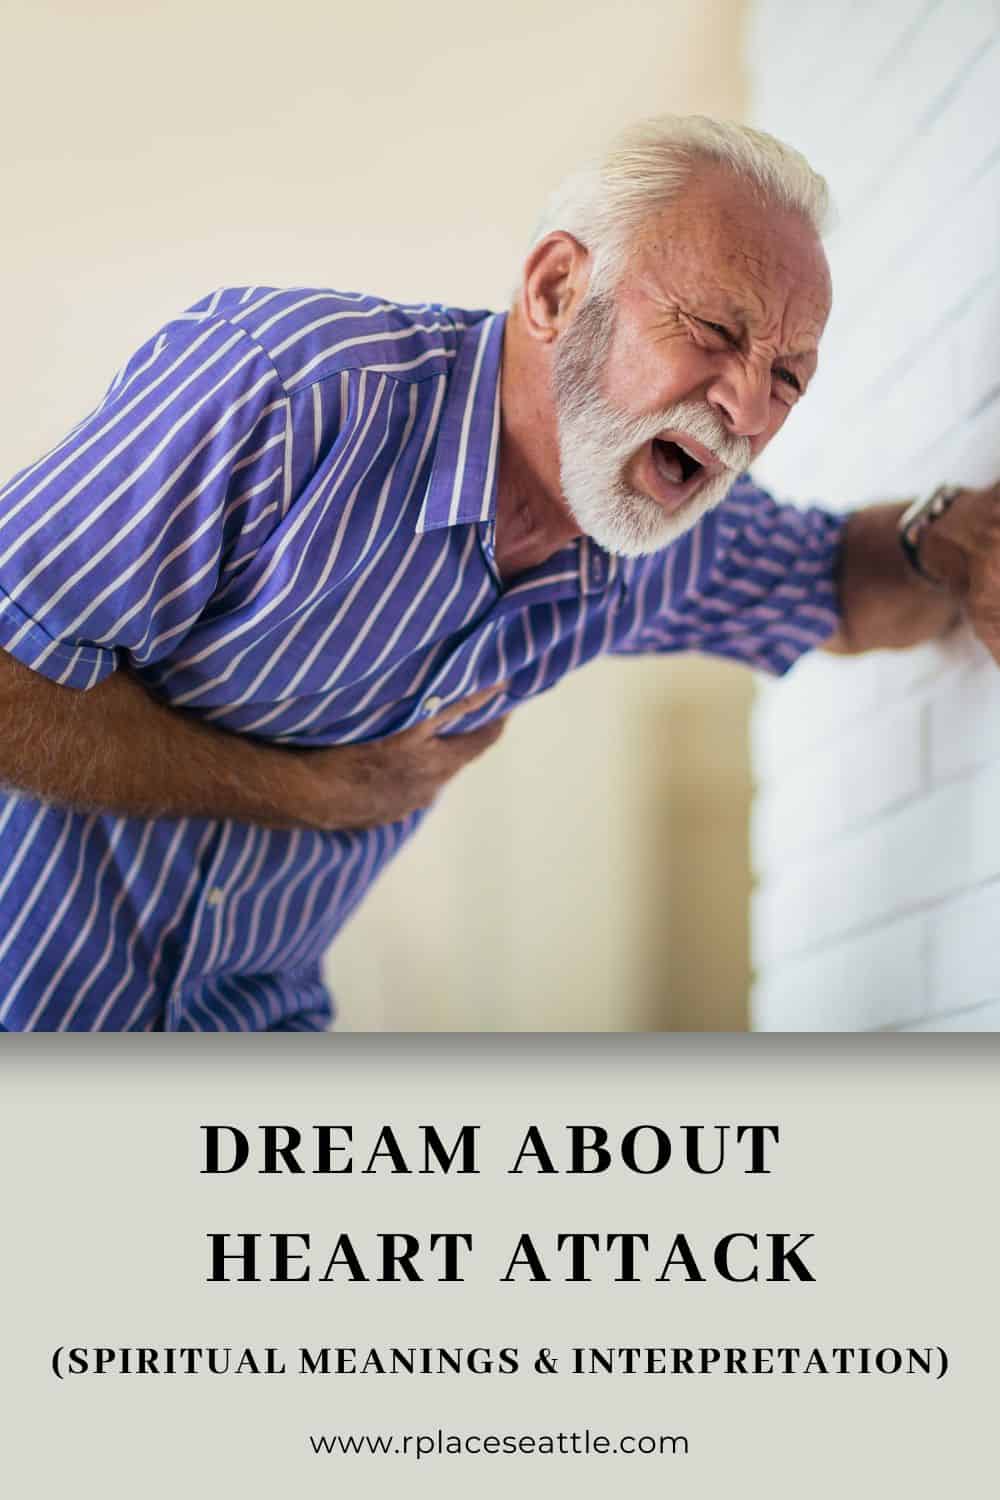 What Does It Mean To Dream Of A Heart Attack?